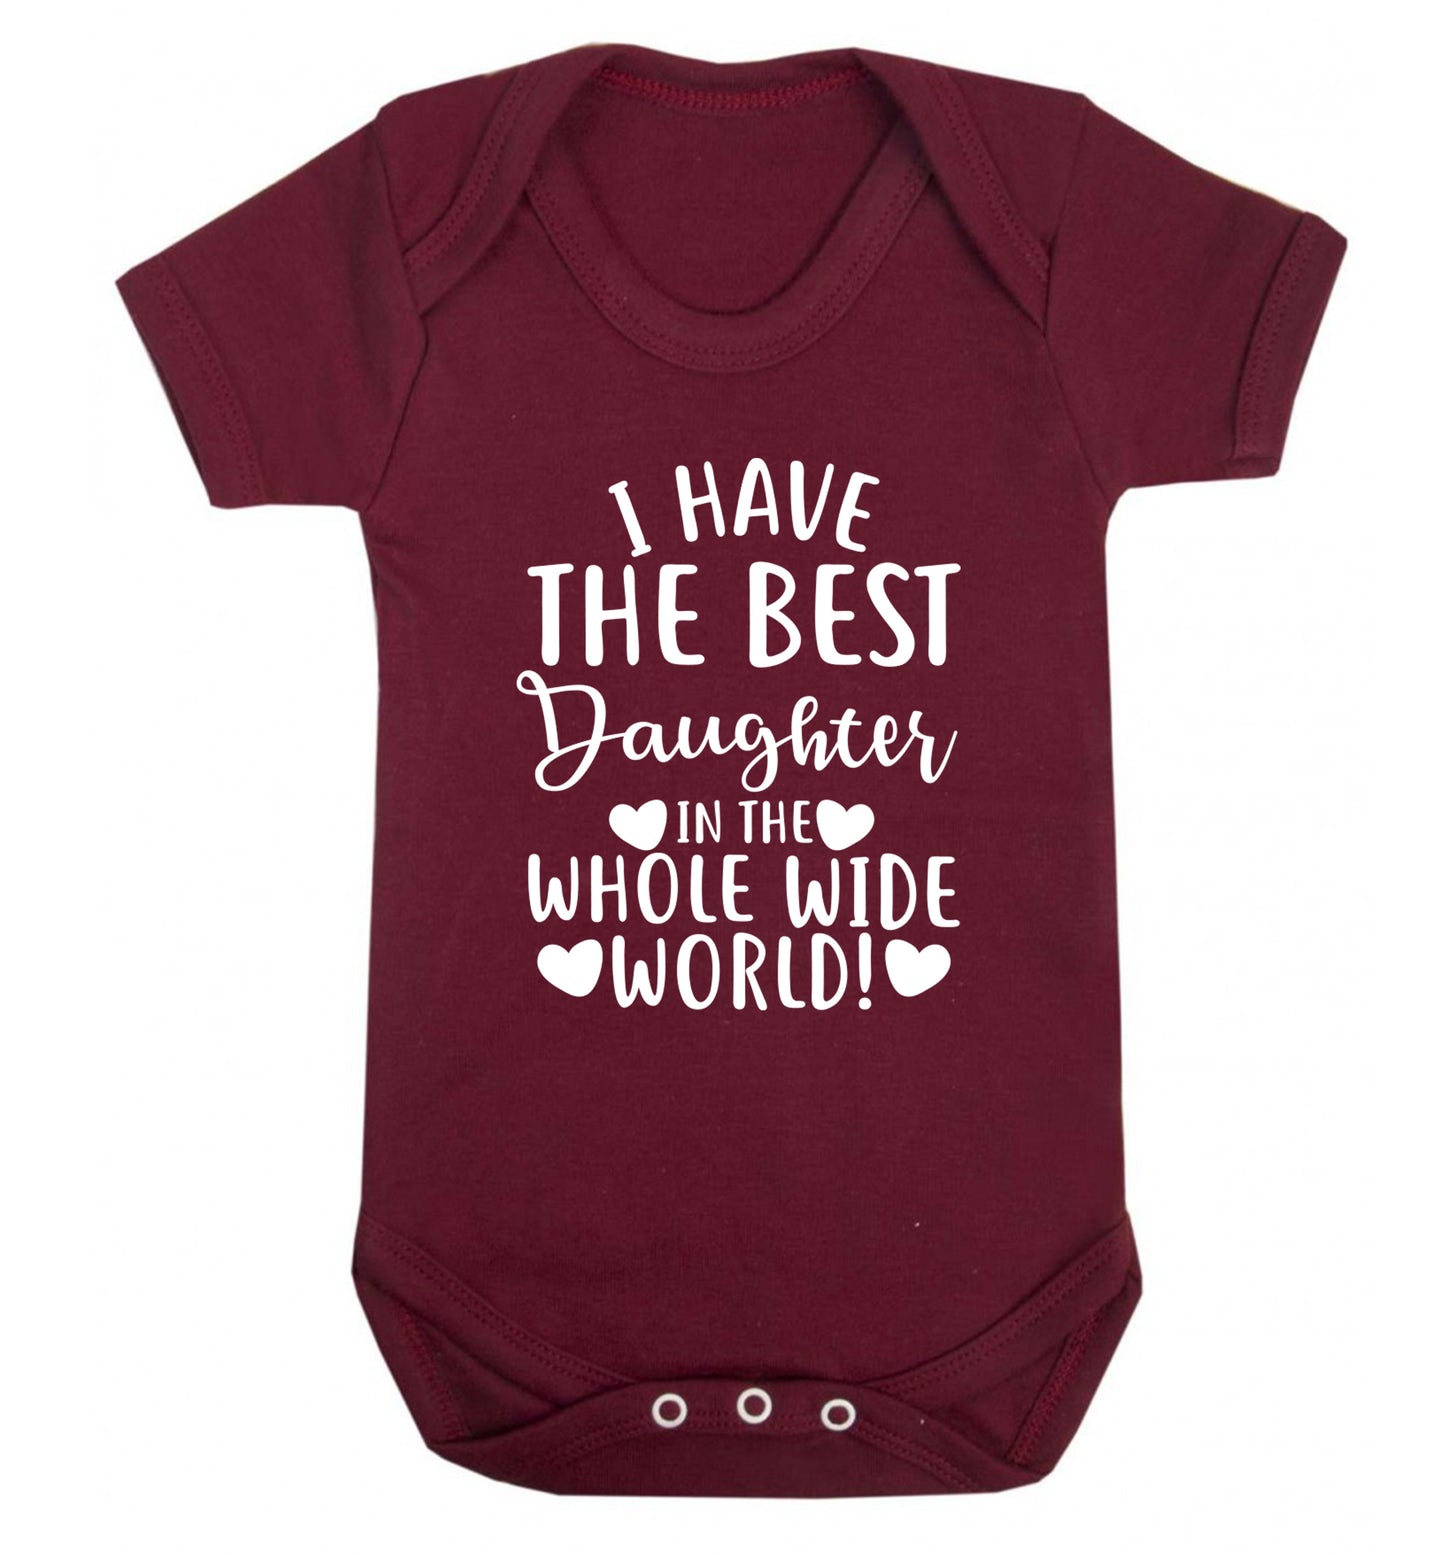 I have the best daughter in the whole wide world! Baby Vest maroon 18-24 months